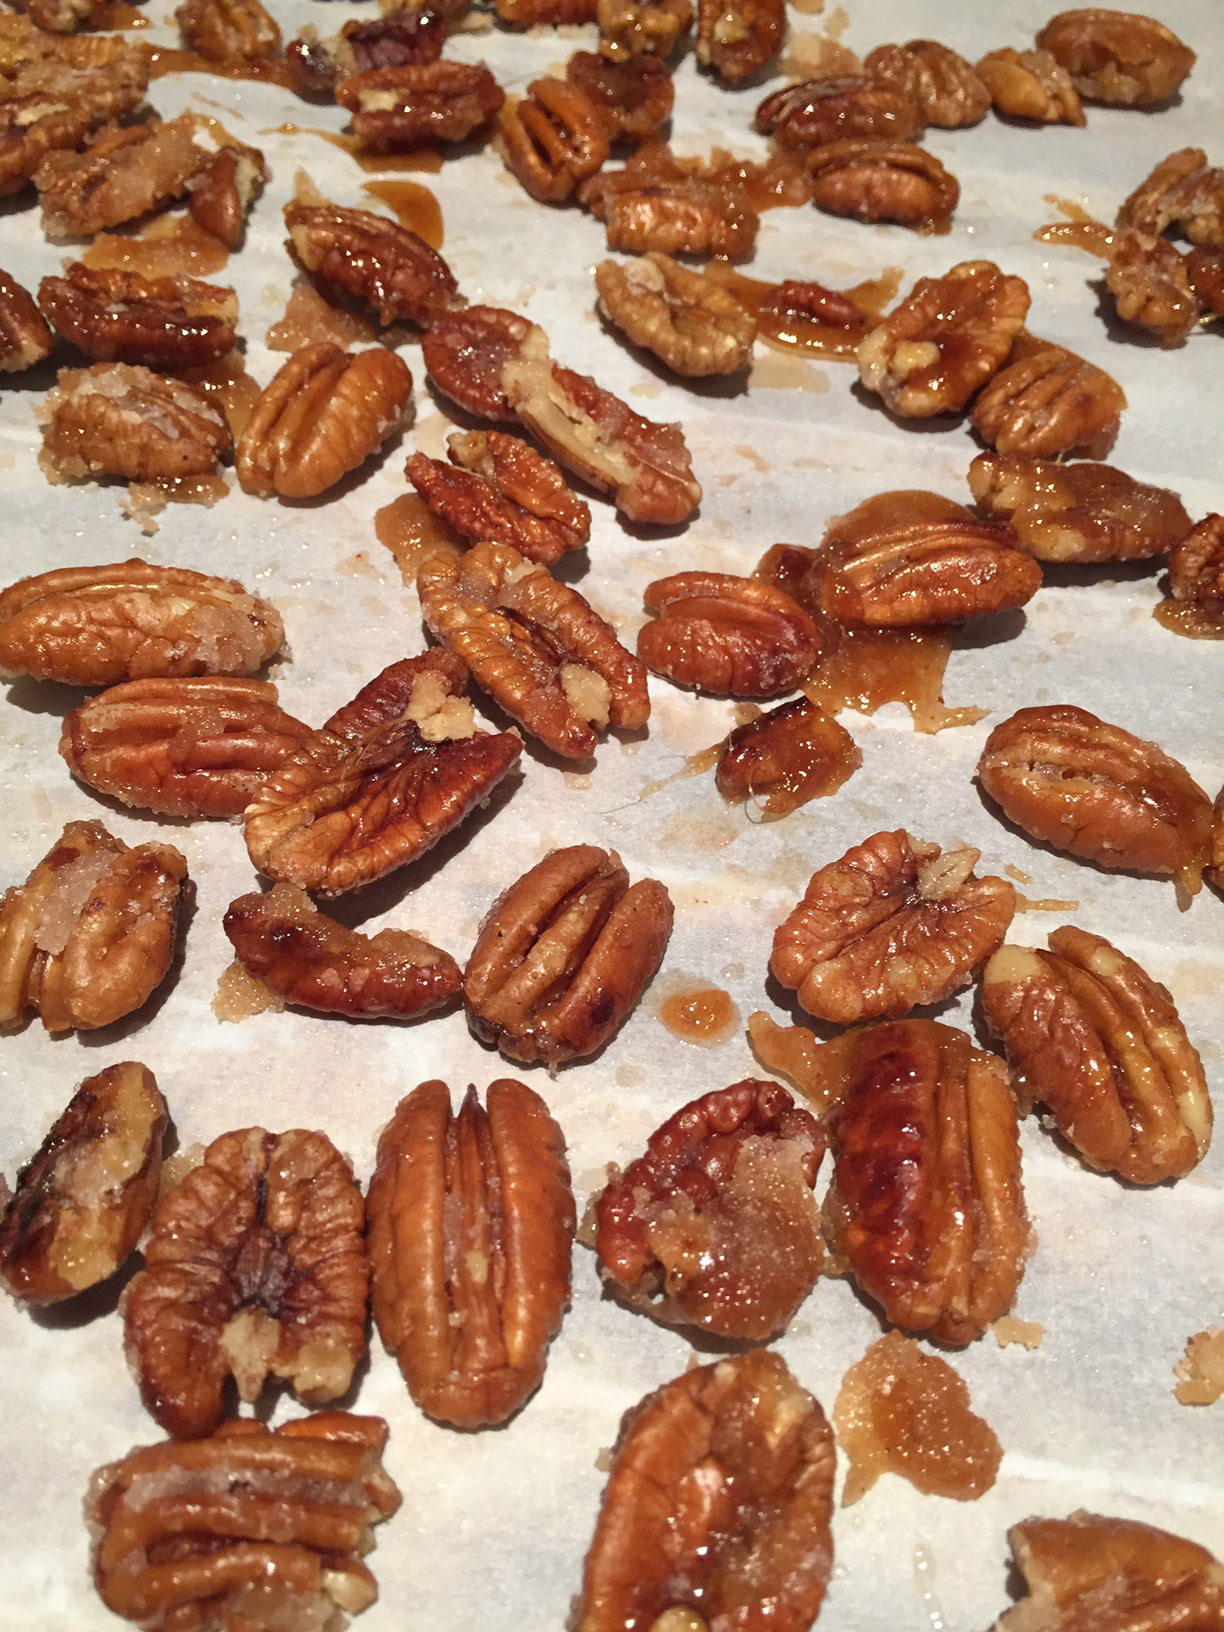 Homemade Candied Nuts Recipe (Pecans, Walnuts or Almonds)